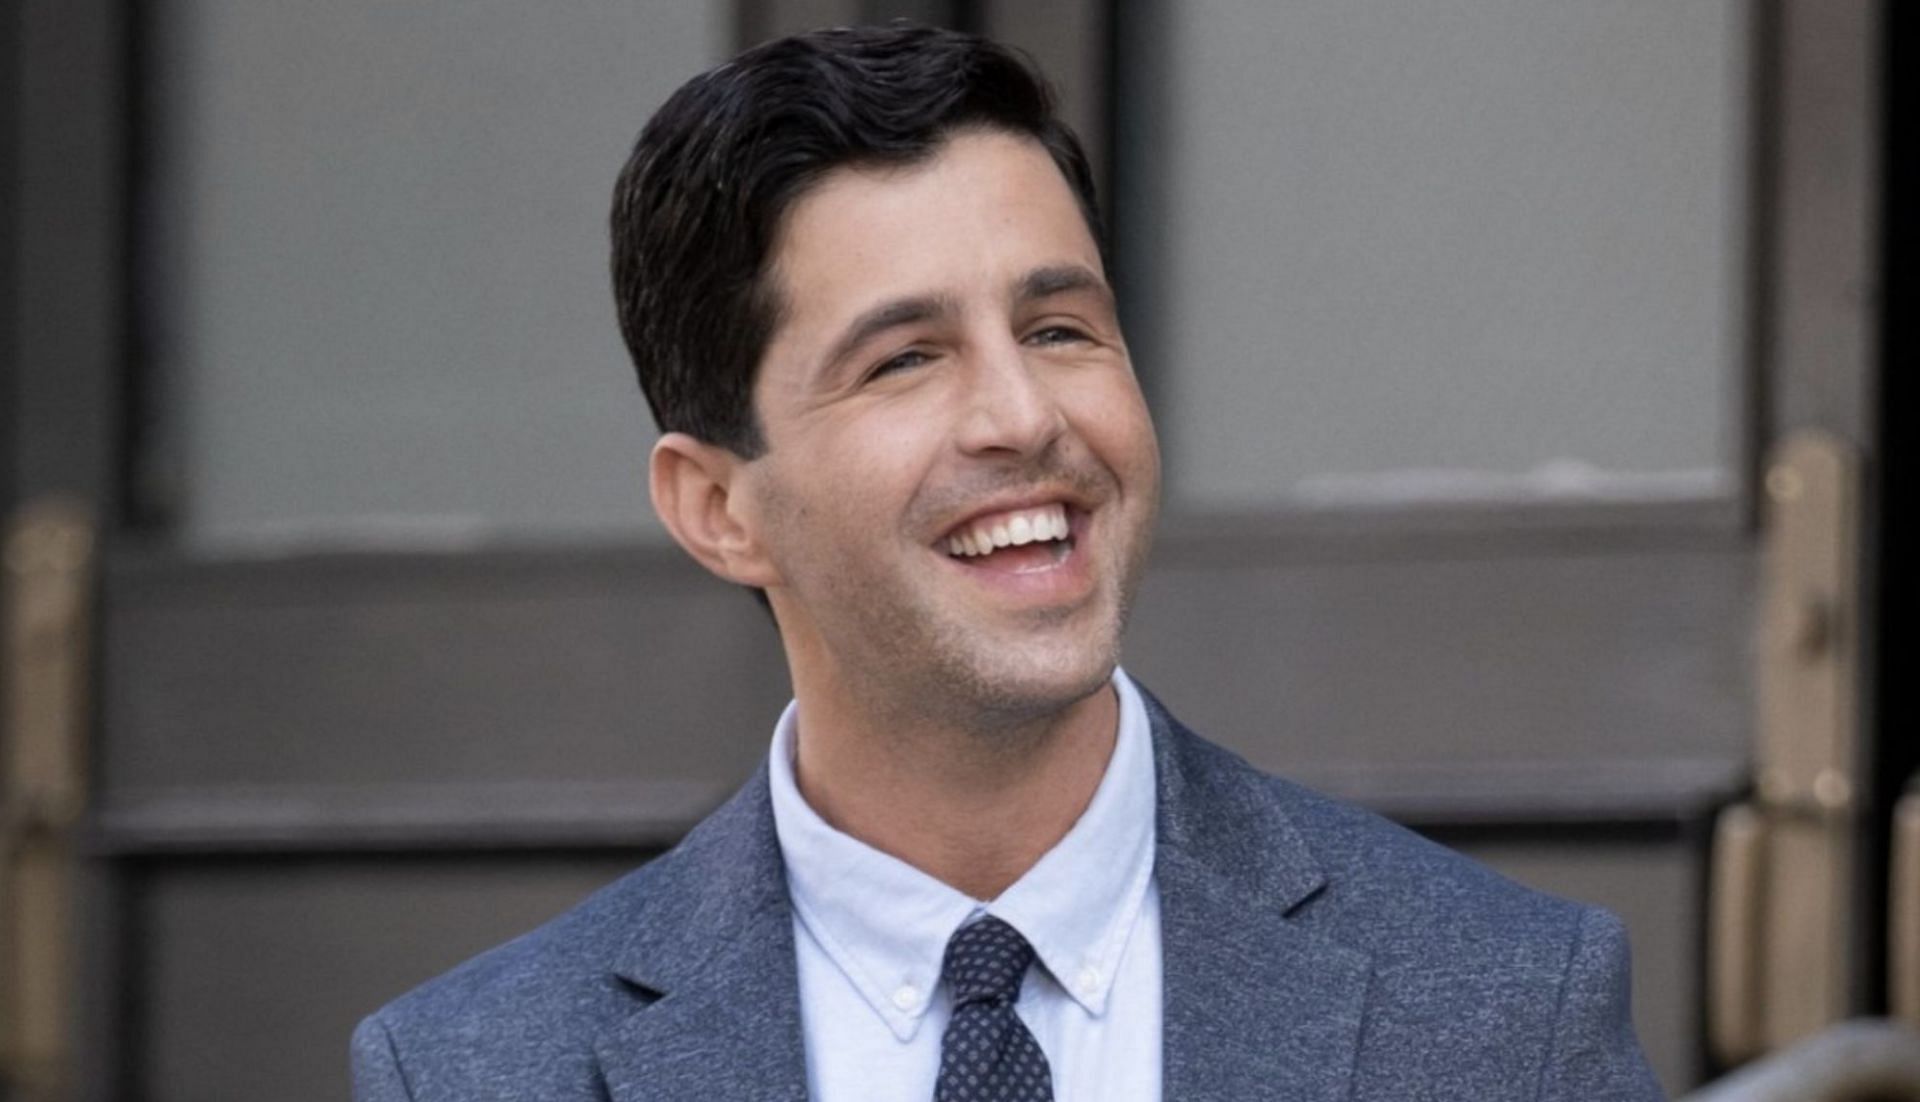 WATCH: Josh Peck could not play hockey because he was a 'thick boy'